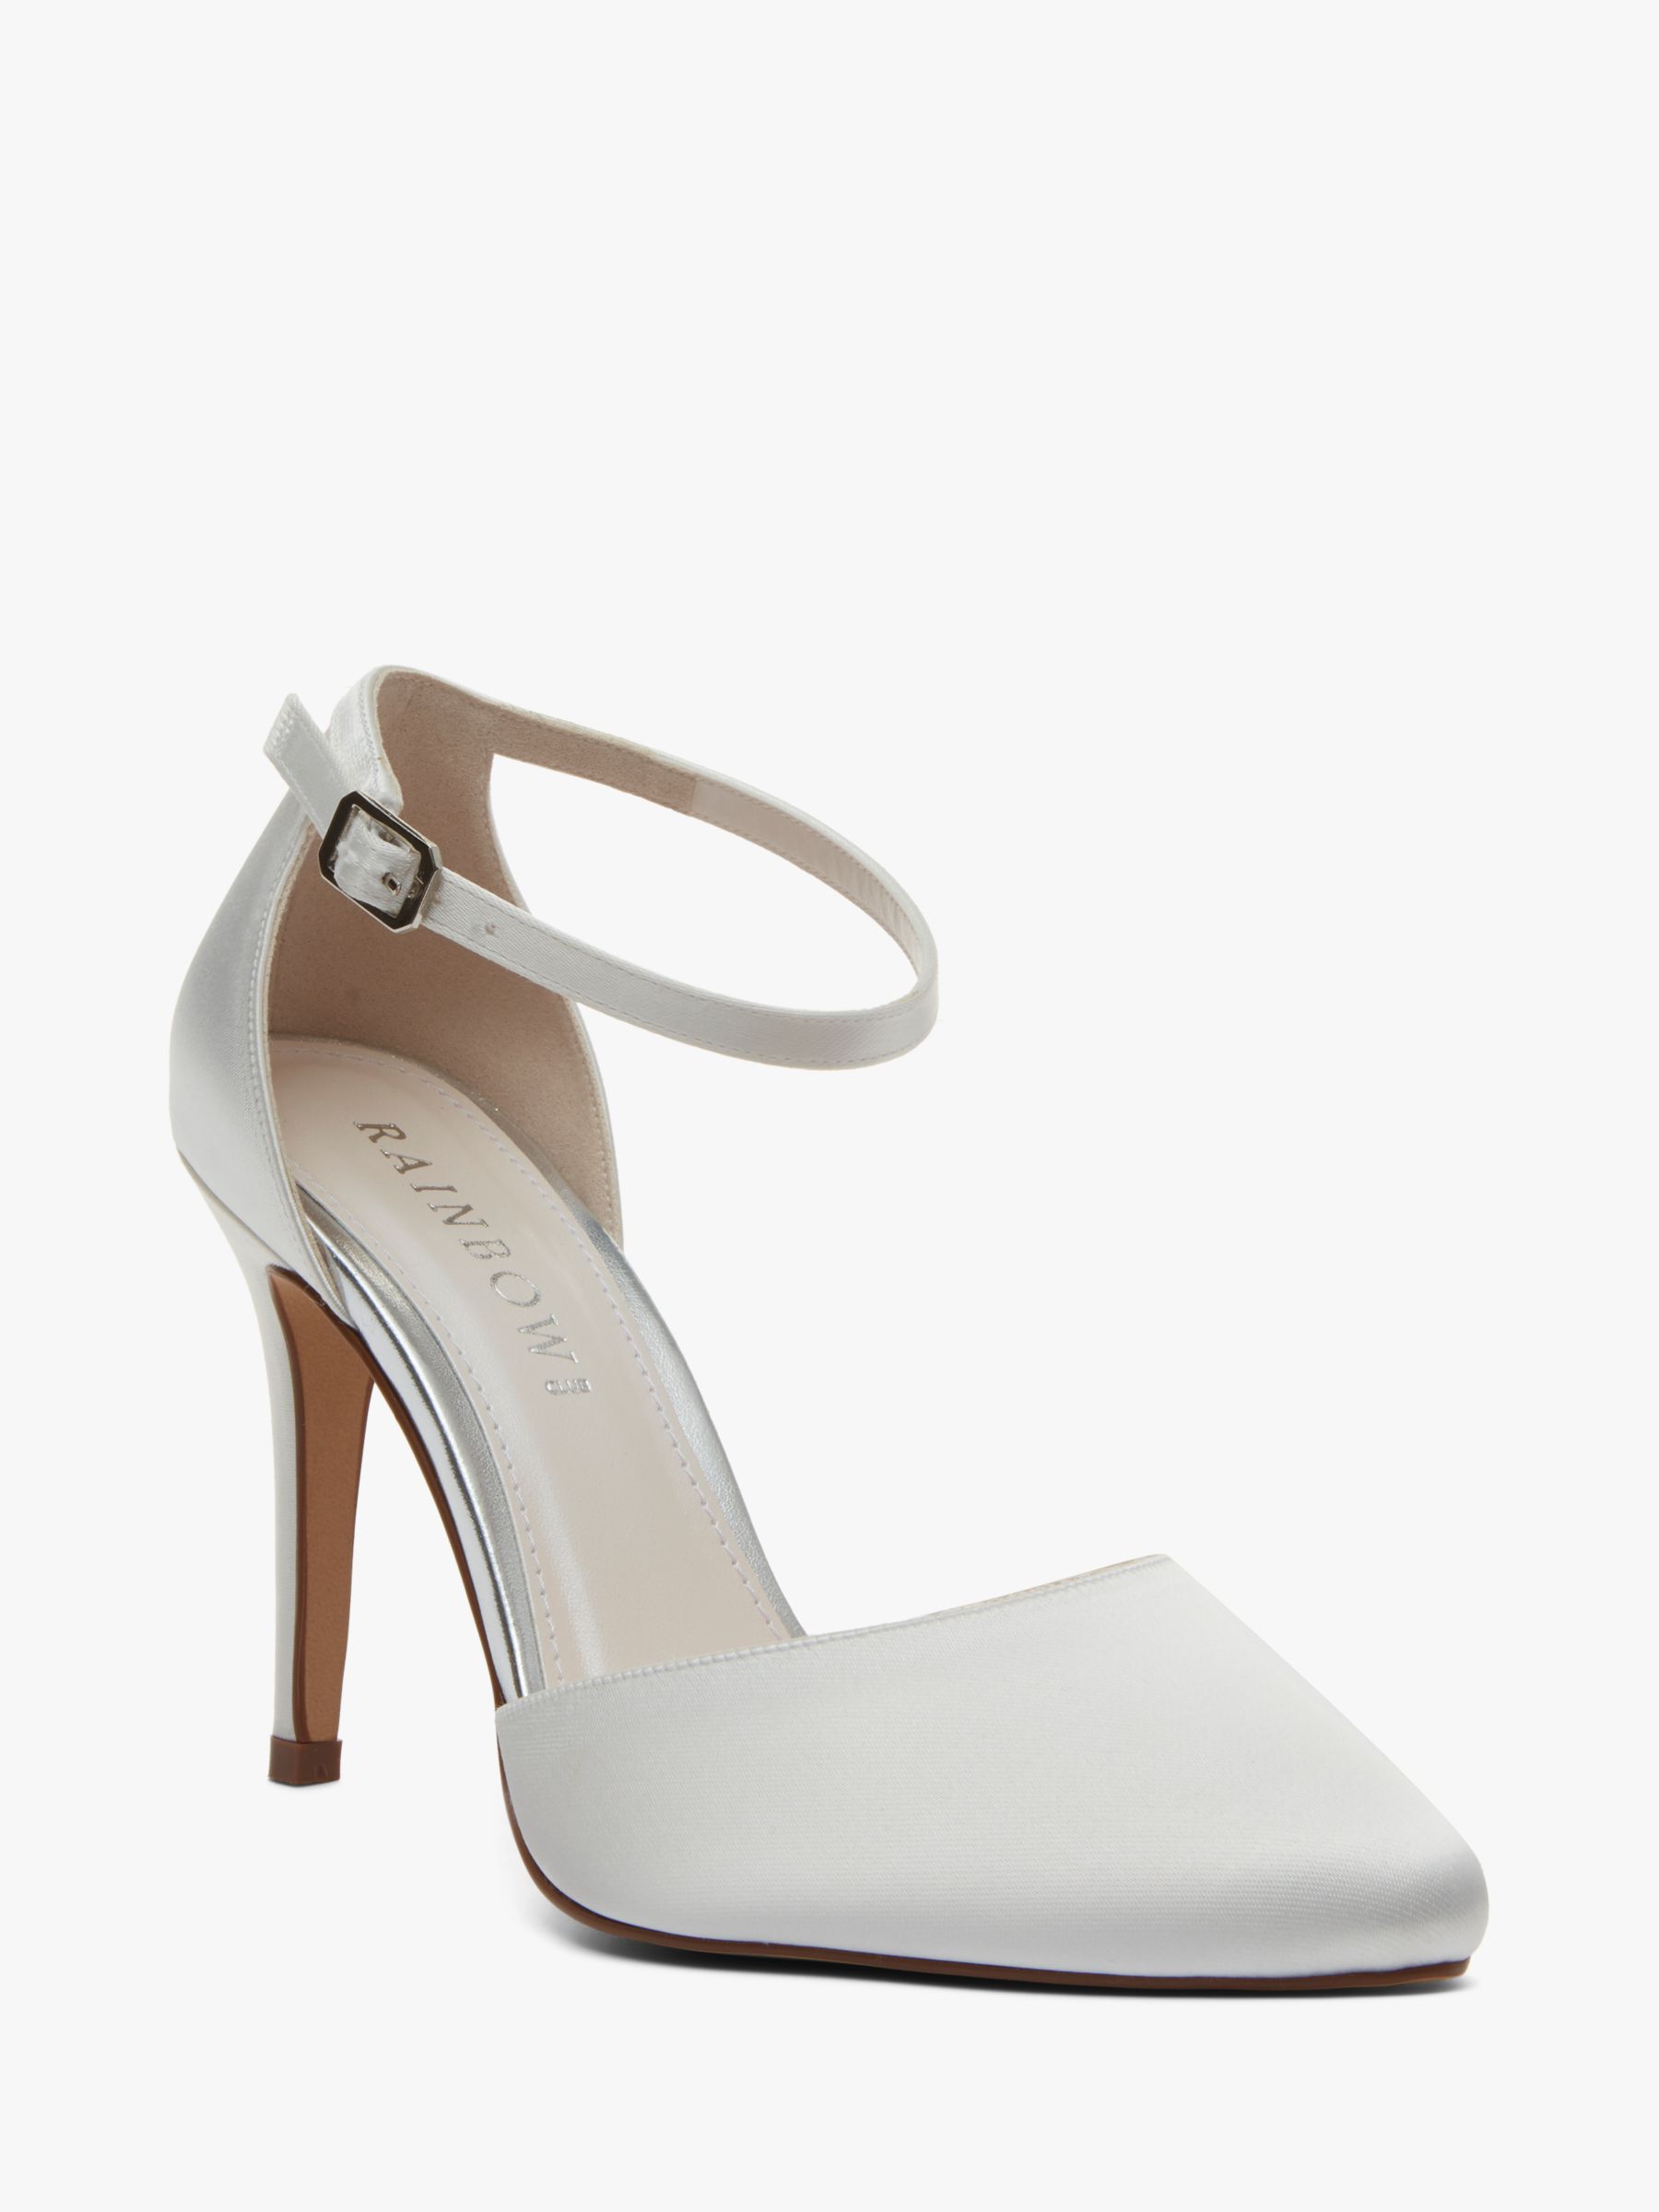 Rainbow Club Carly Court Shoes, Ivory, 6.5